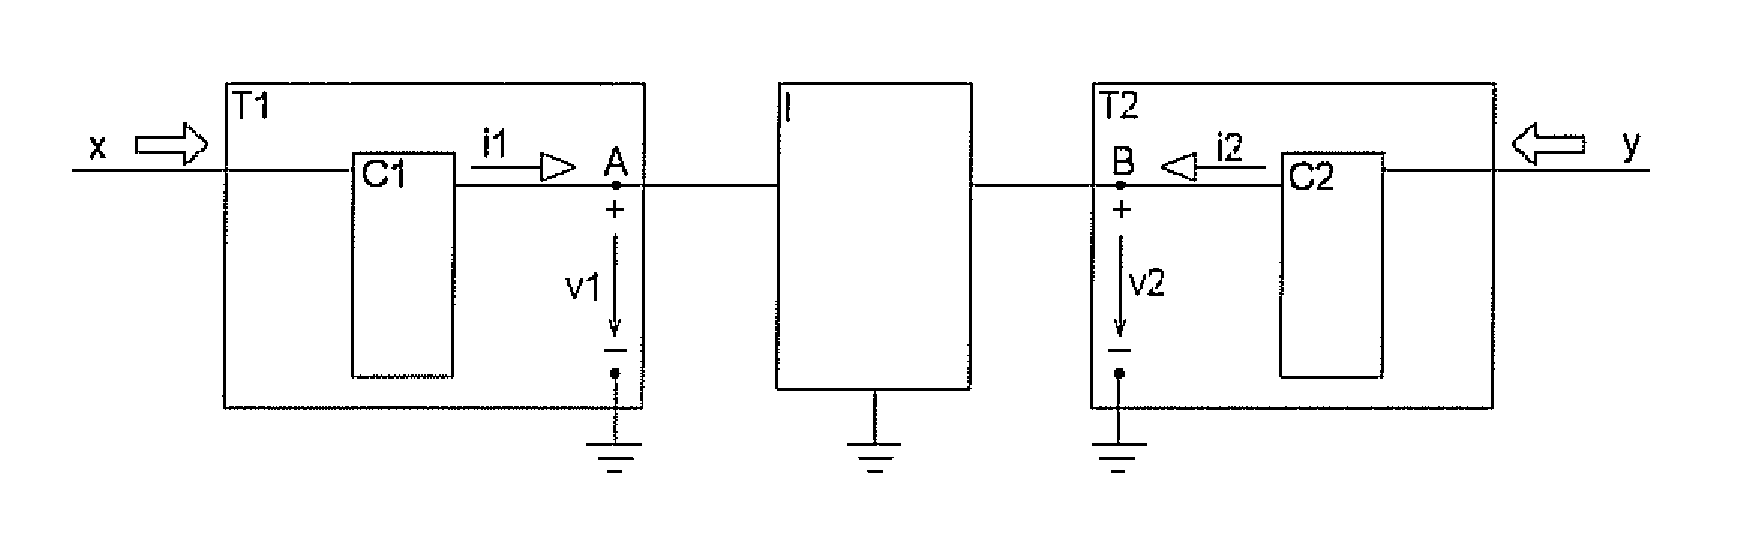 Simultaneous full-duplex communication over a single electrical conductor